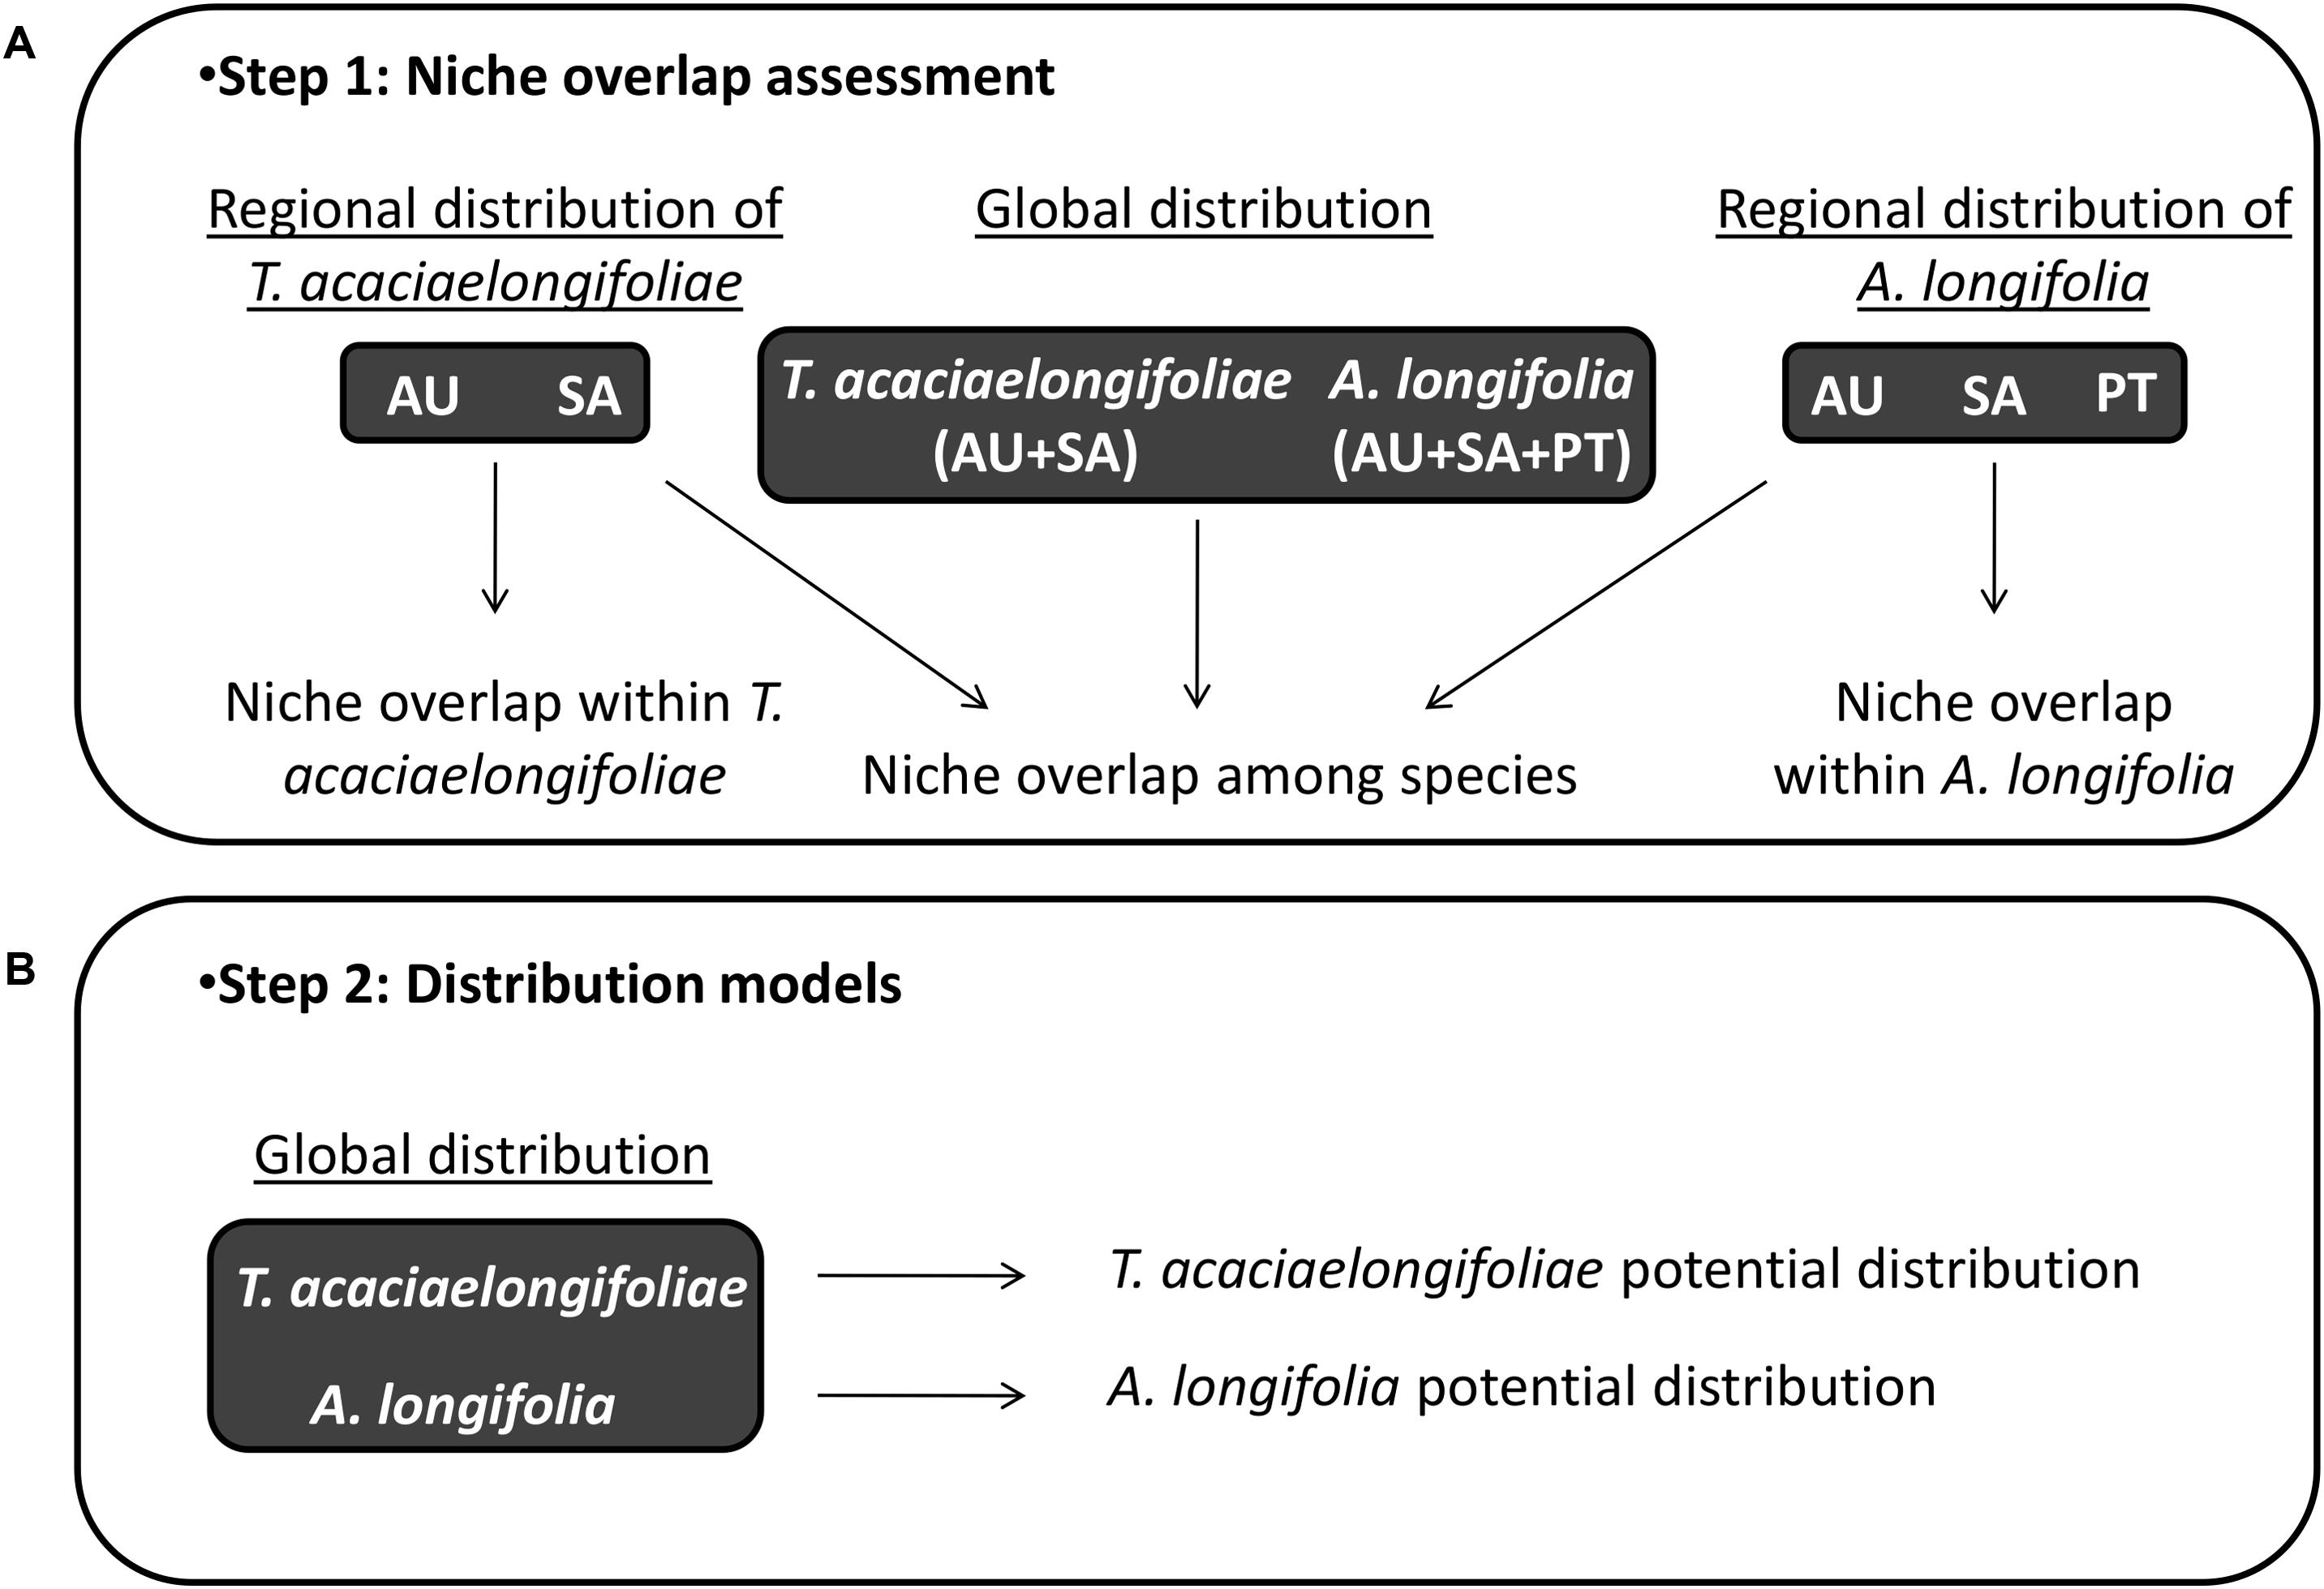 Frontiers Can Niche Dynamics And Distribution Modeling Predict The Success Of Invasive Species Management Using Biocontrol Insights From Acacia Longifolia In Portugal Ecology And Evolution